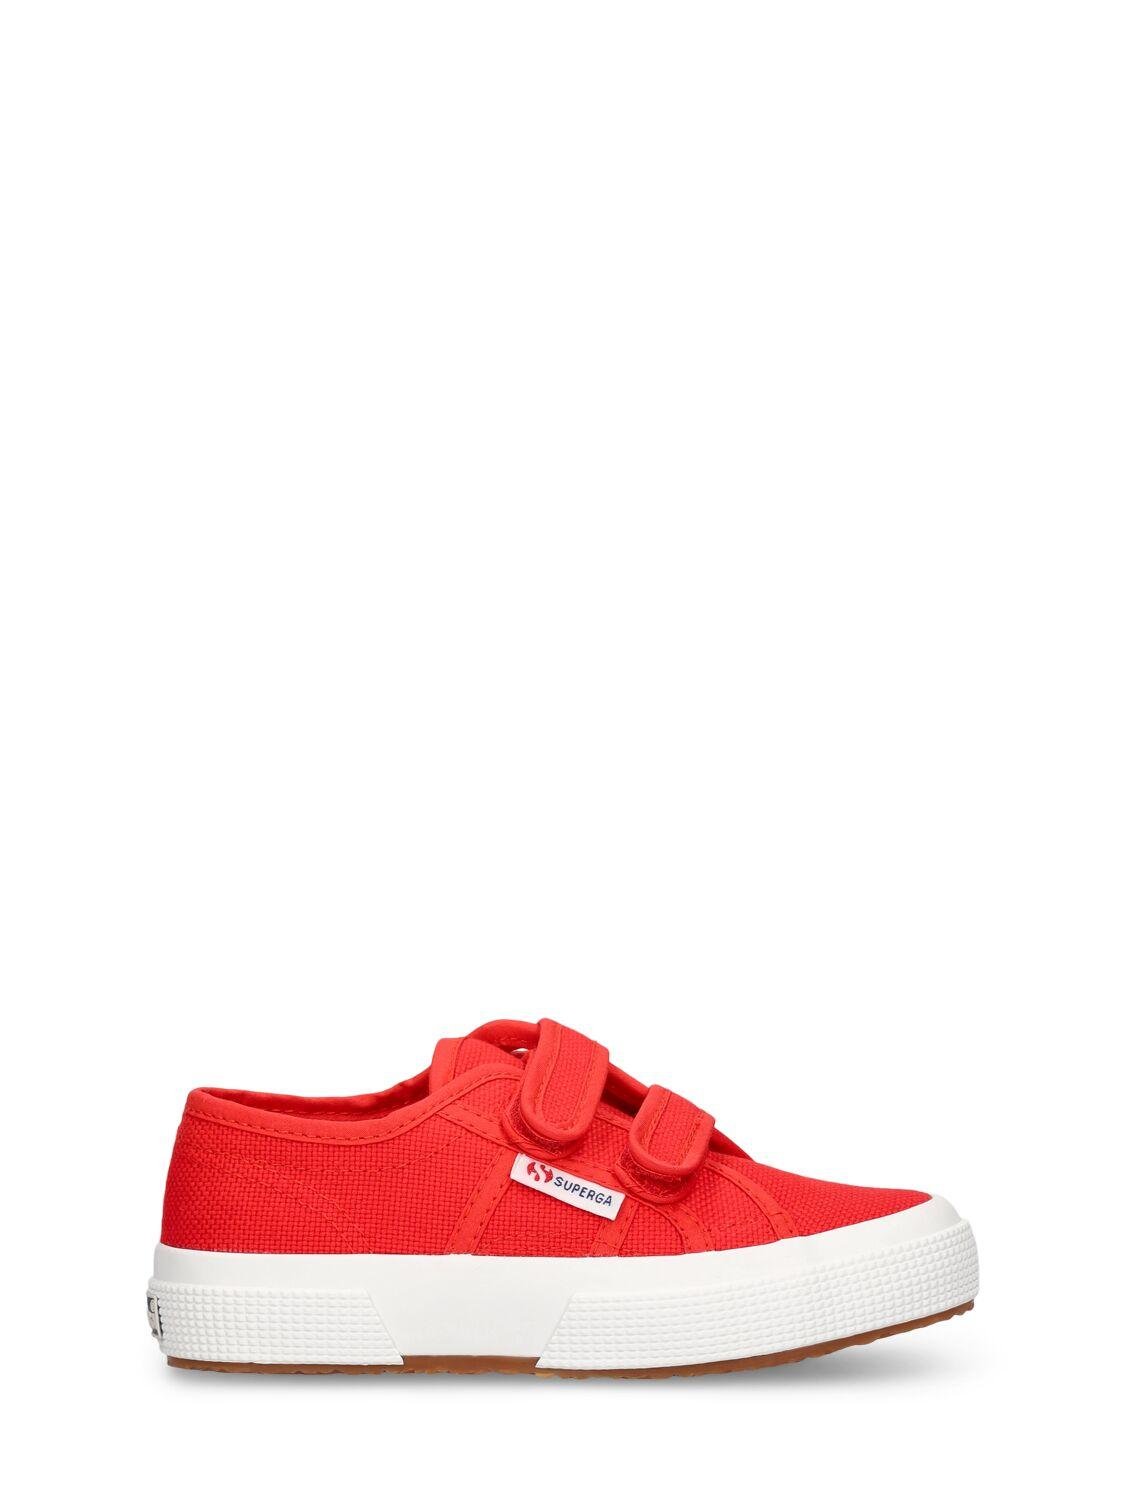 2750-cotjstrap Classic Canvas Sneakers by SUPERGA